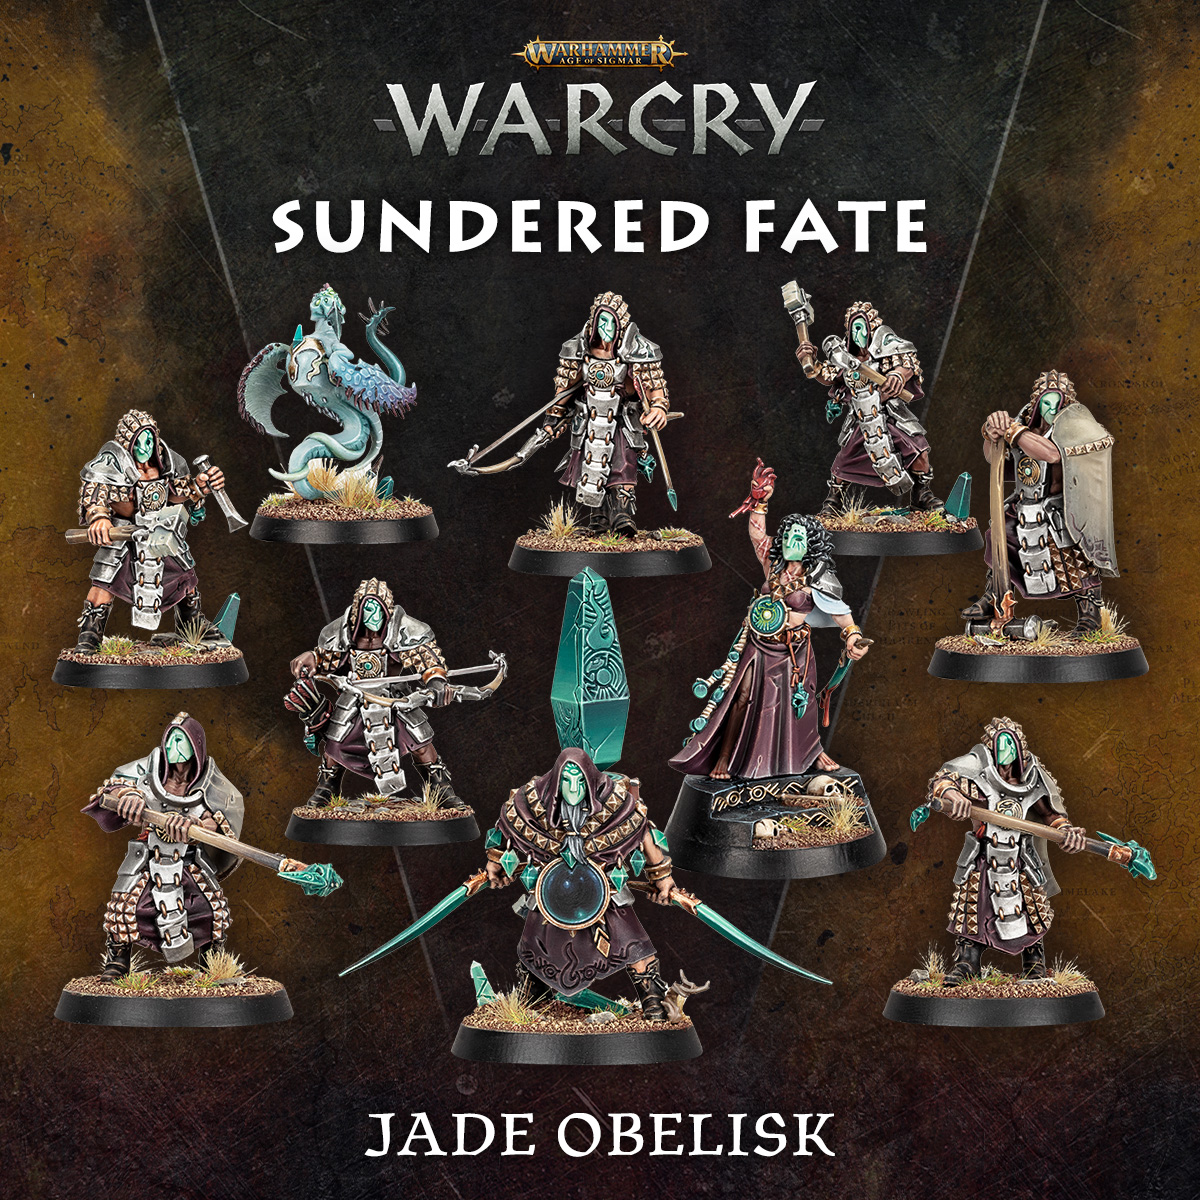 New Age Of Sigmar: Warcry Set Revealed – Sundered Fate ...